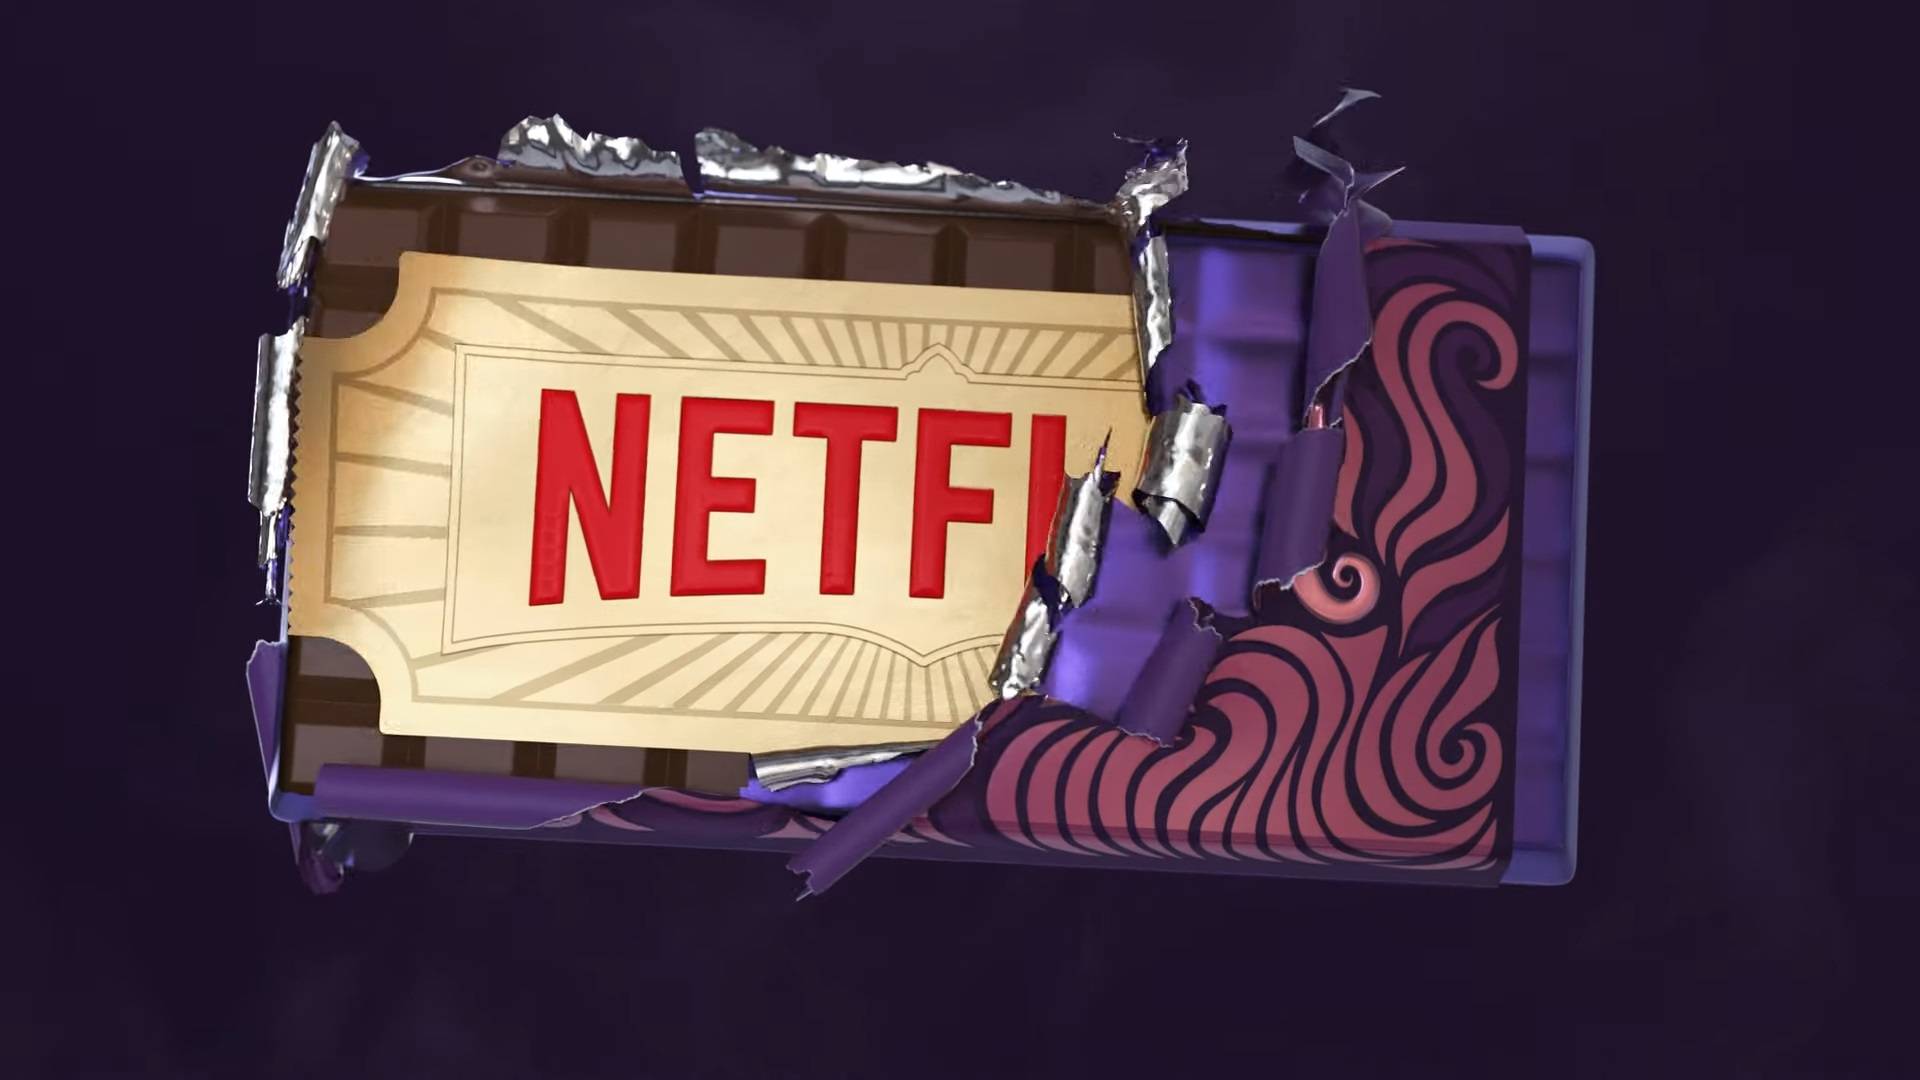 Netflix proper announced its ideal acquisition of all time